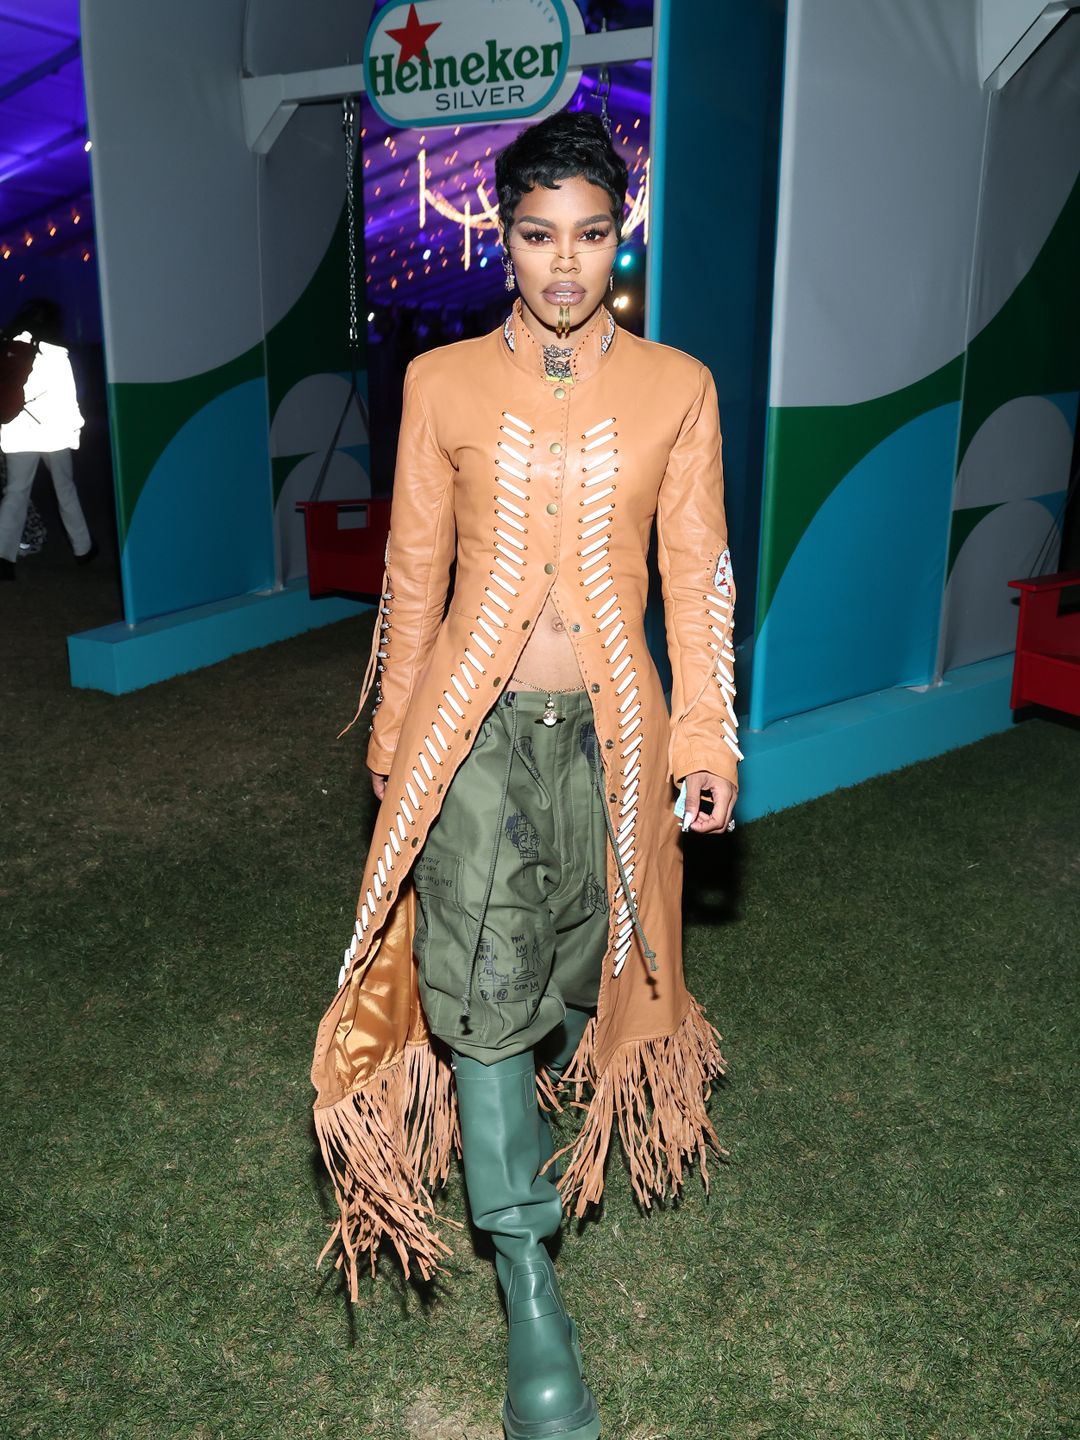 COACHELLA, CALIFORNIA - APRIL 14: Teyana Taylor stops by the Heineken House at the 2023 Coachella Valley Music and Arts Festival on April 14, 2023 in Indio, California. (Photo by Phillip Faraone/Getty Images for Heineken)